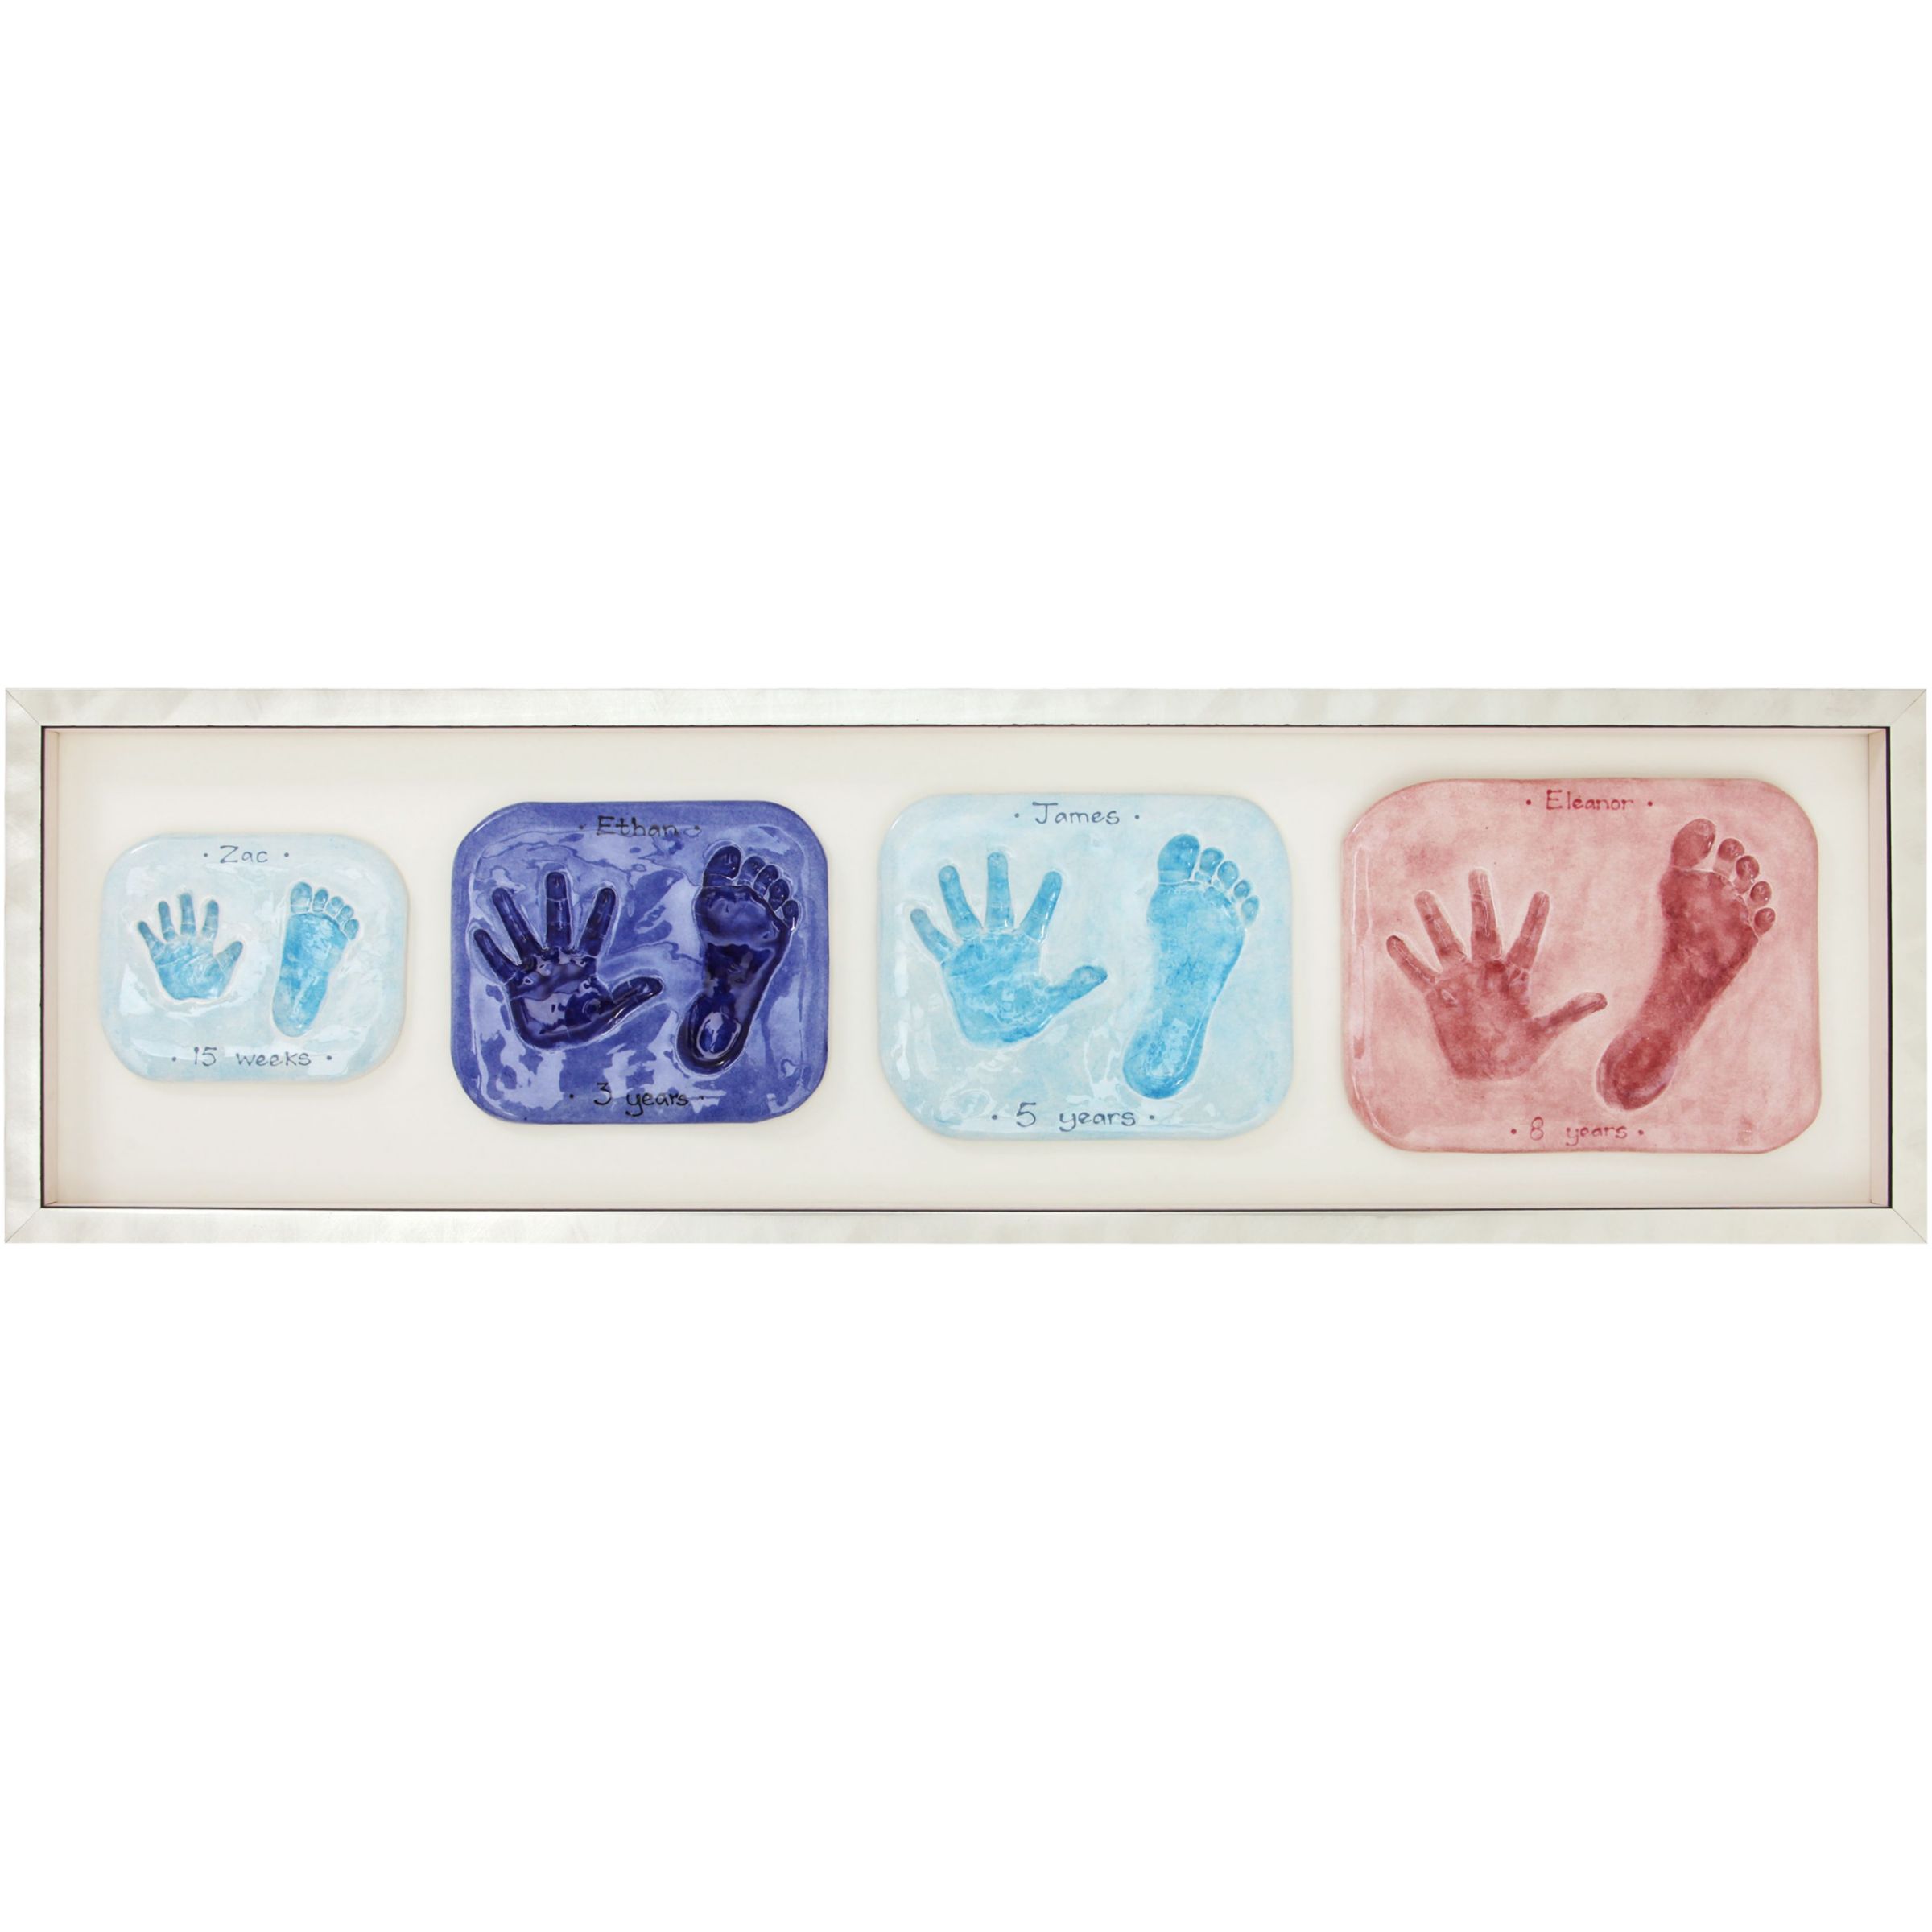 Imprints Gift Certificate, 4 Double Family Prints, Silver Frame at John Lewis